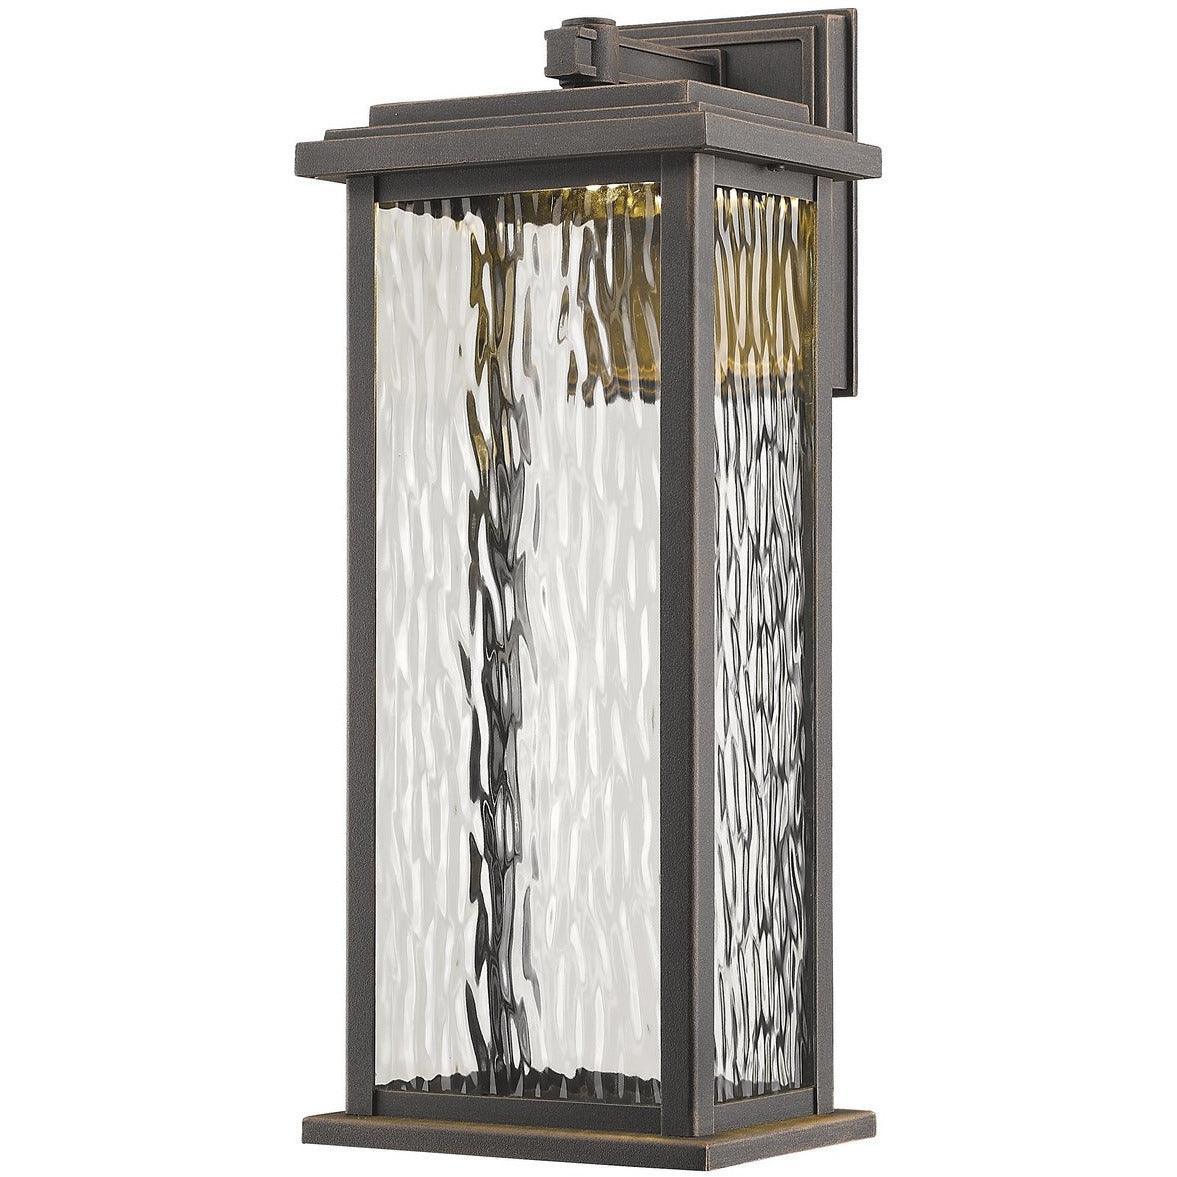 Artcraft Lighting - Sussex Drive LED Outdoor Wall Mount - AC9071OB | Montreal Lighting & Hardware